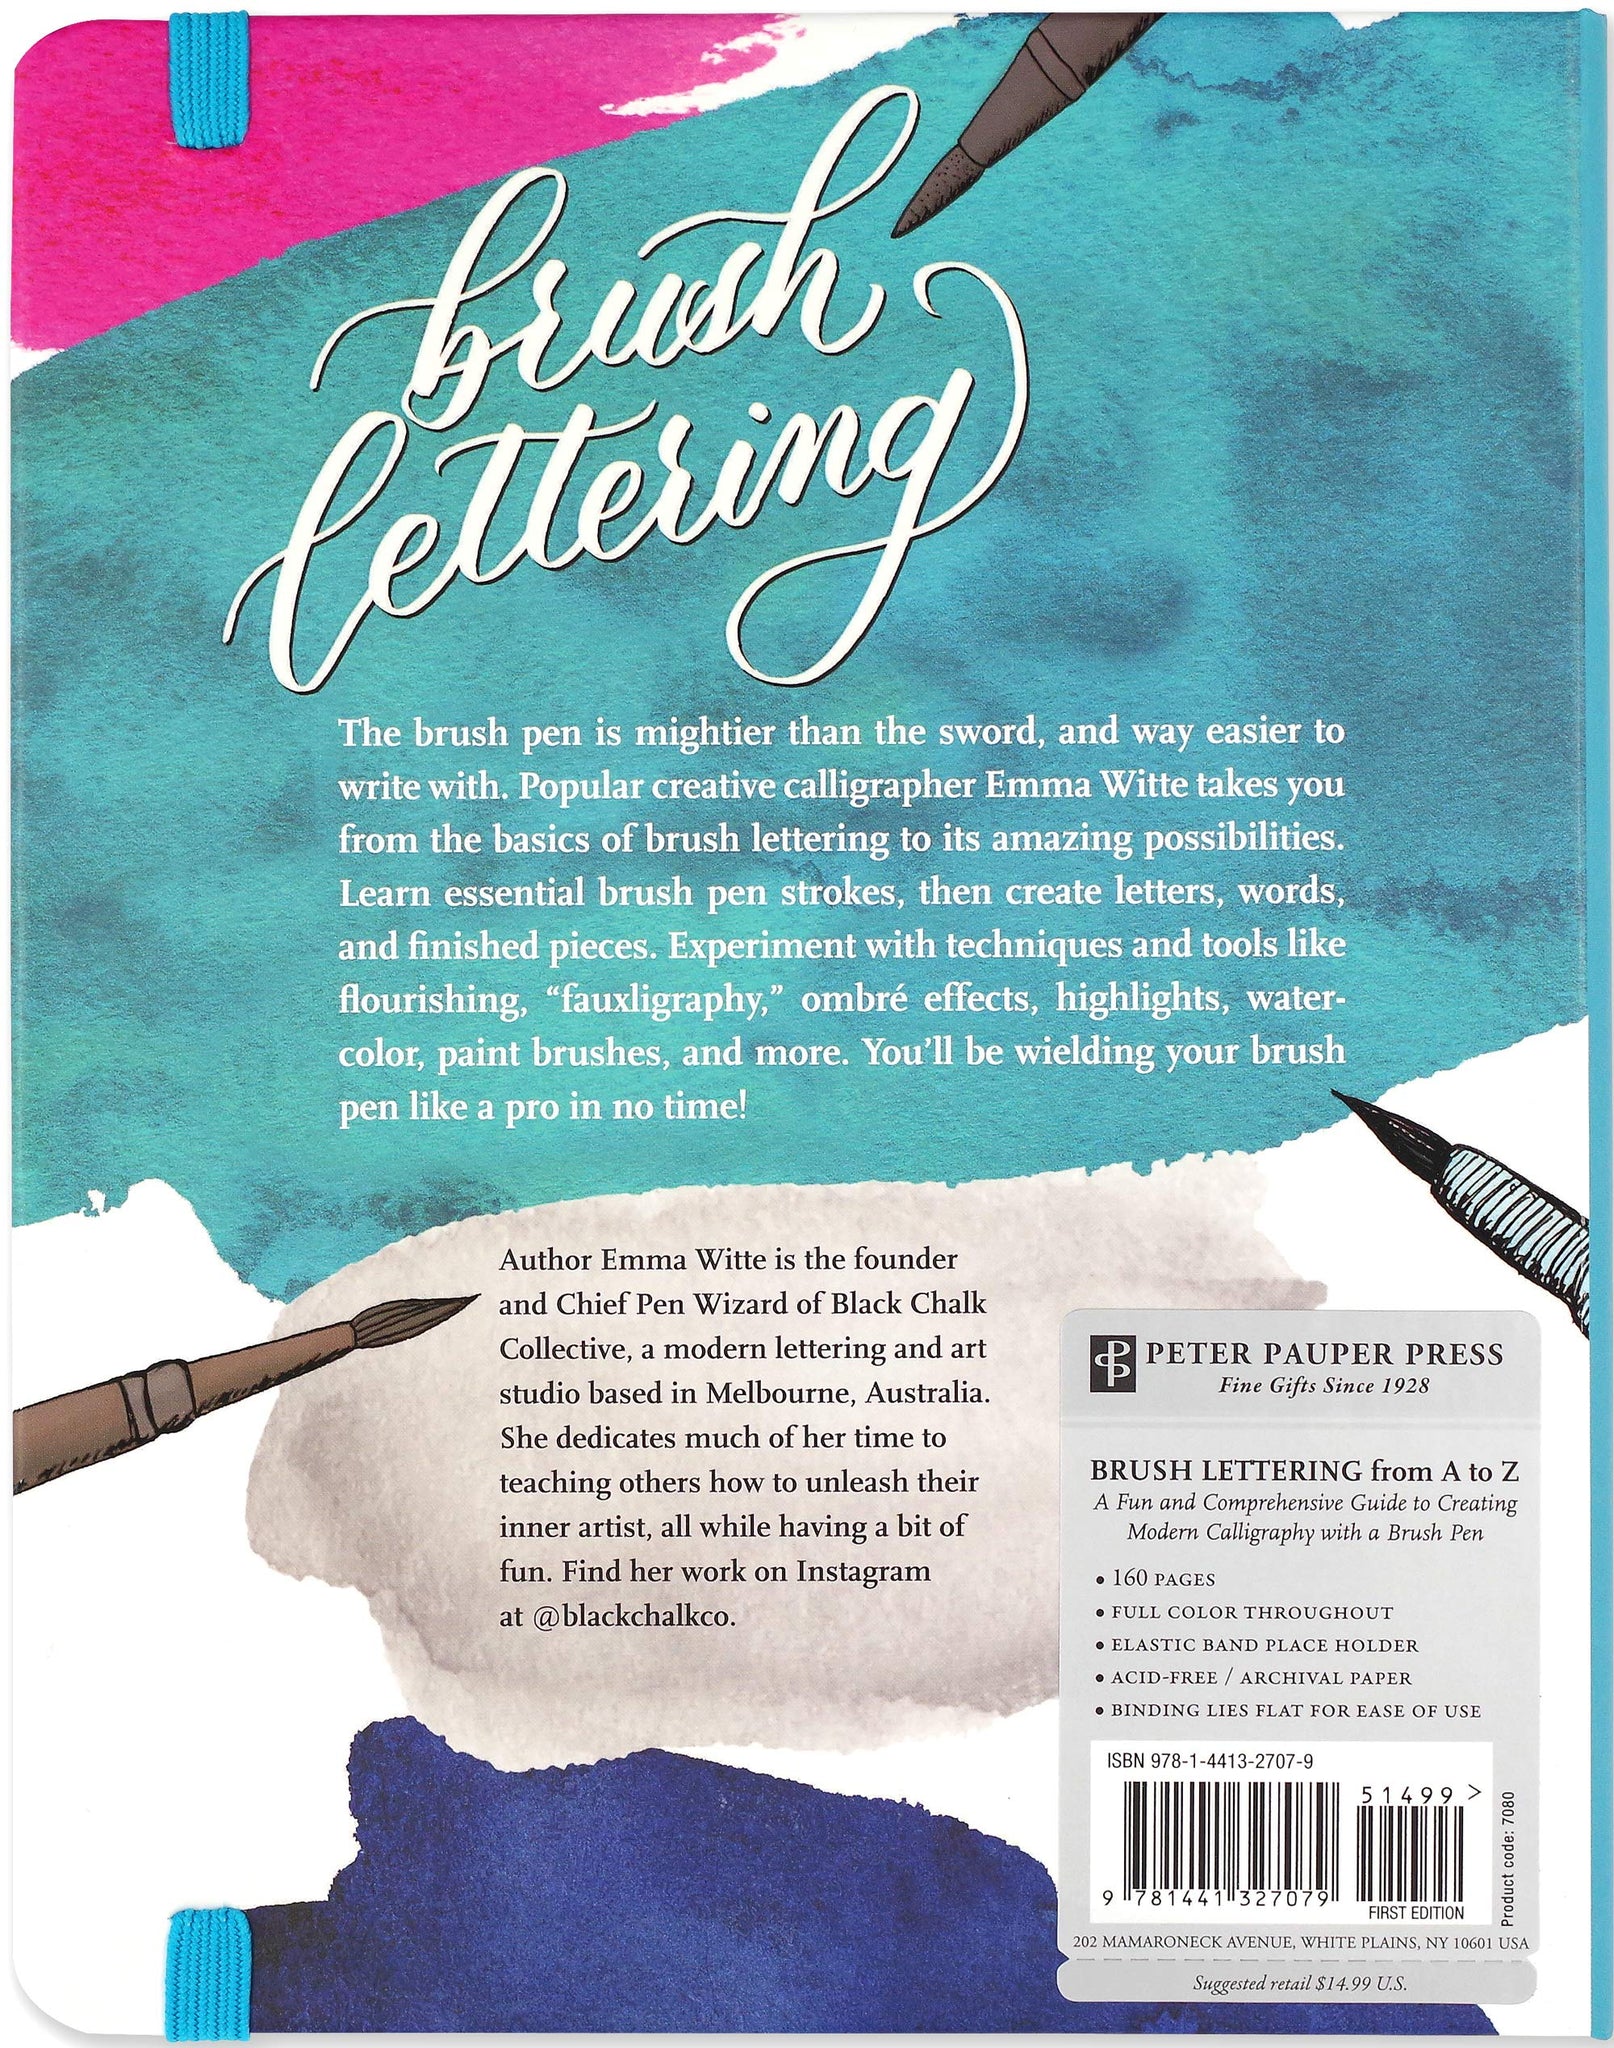 Brush Lettering From A to Z